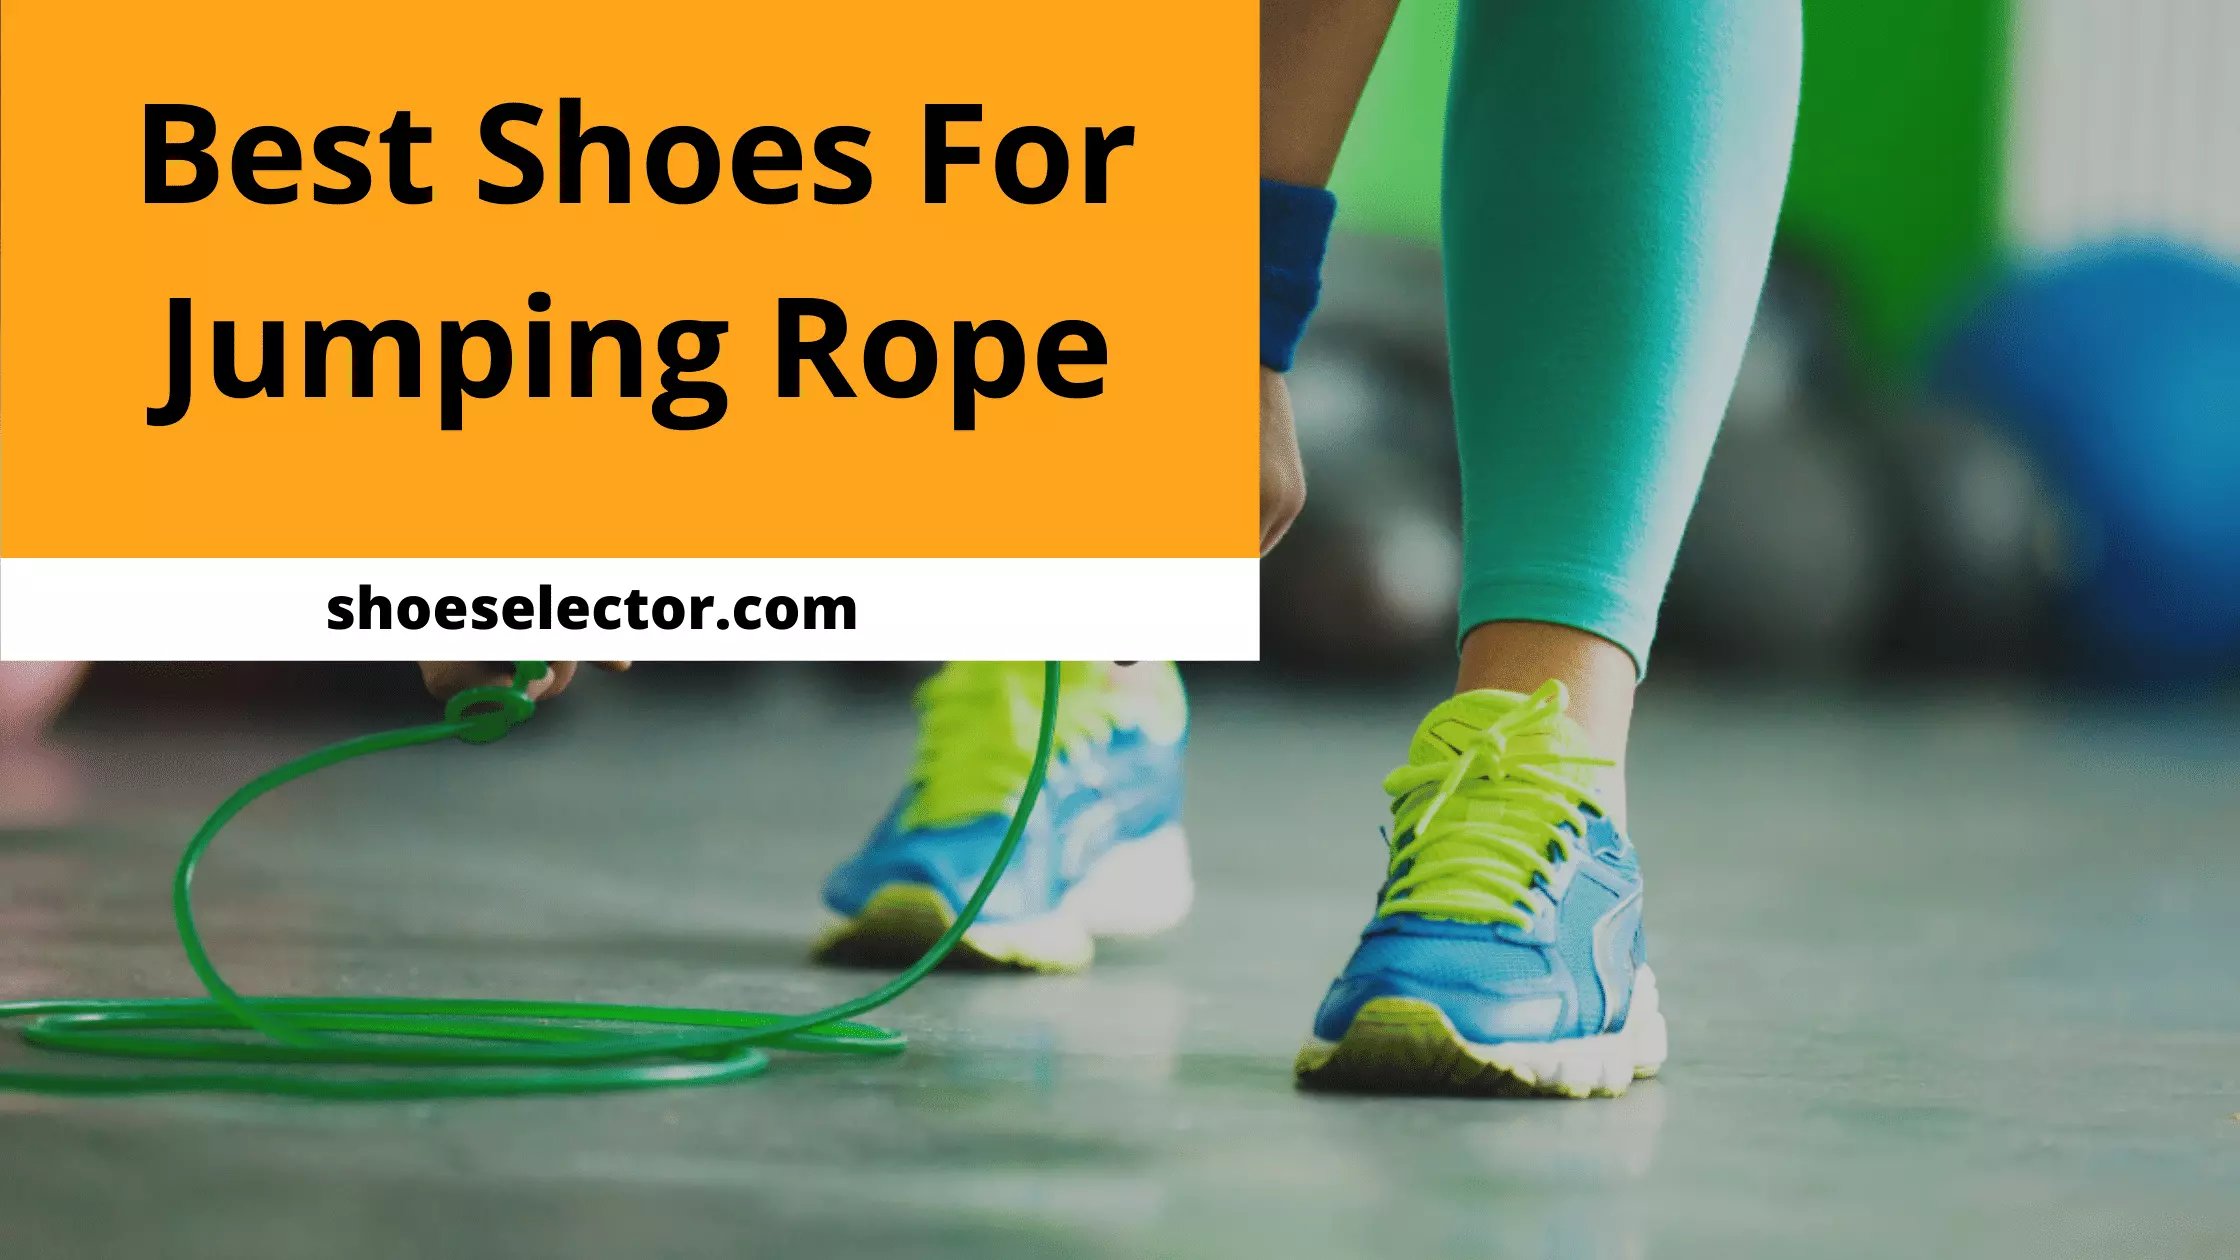 Best Shoes For Jumping Rope With Products Comparison